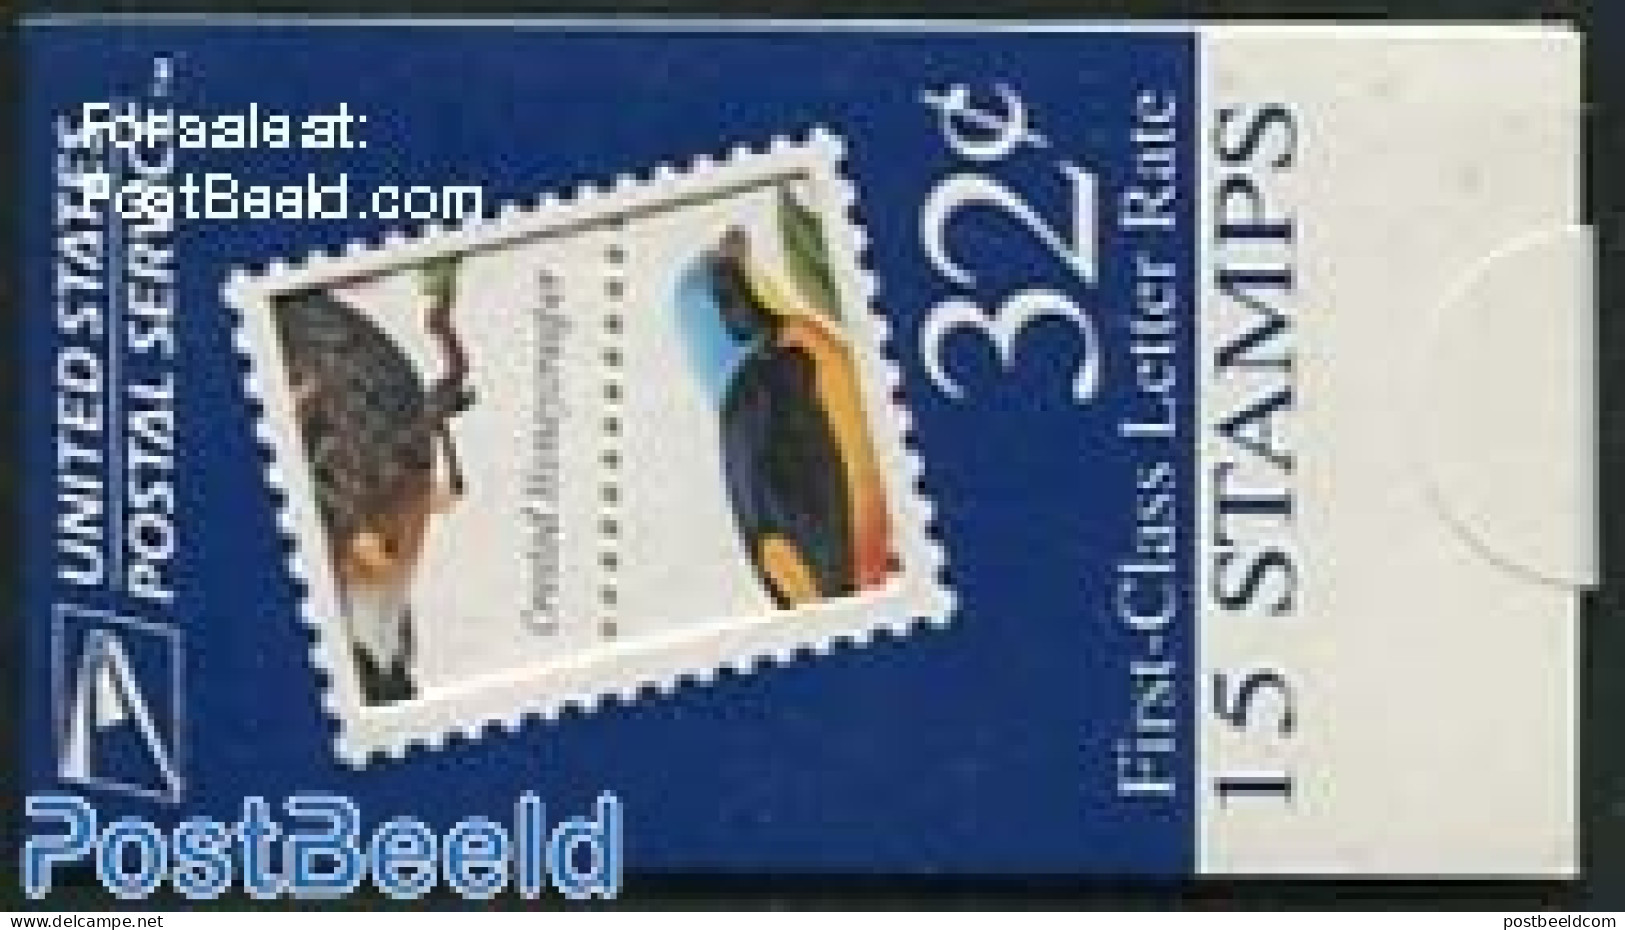 United States Of America 1998 Birds Booklet, Mint NH, Nature - Birds - Stamp Booklets - Neufs